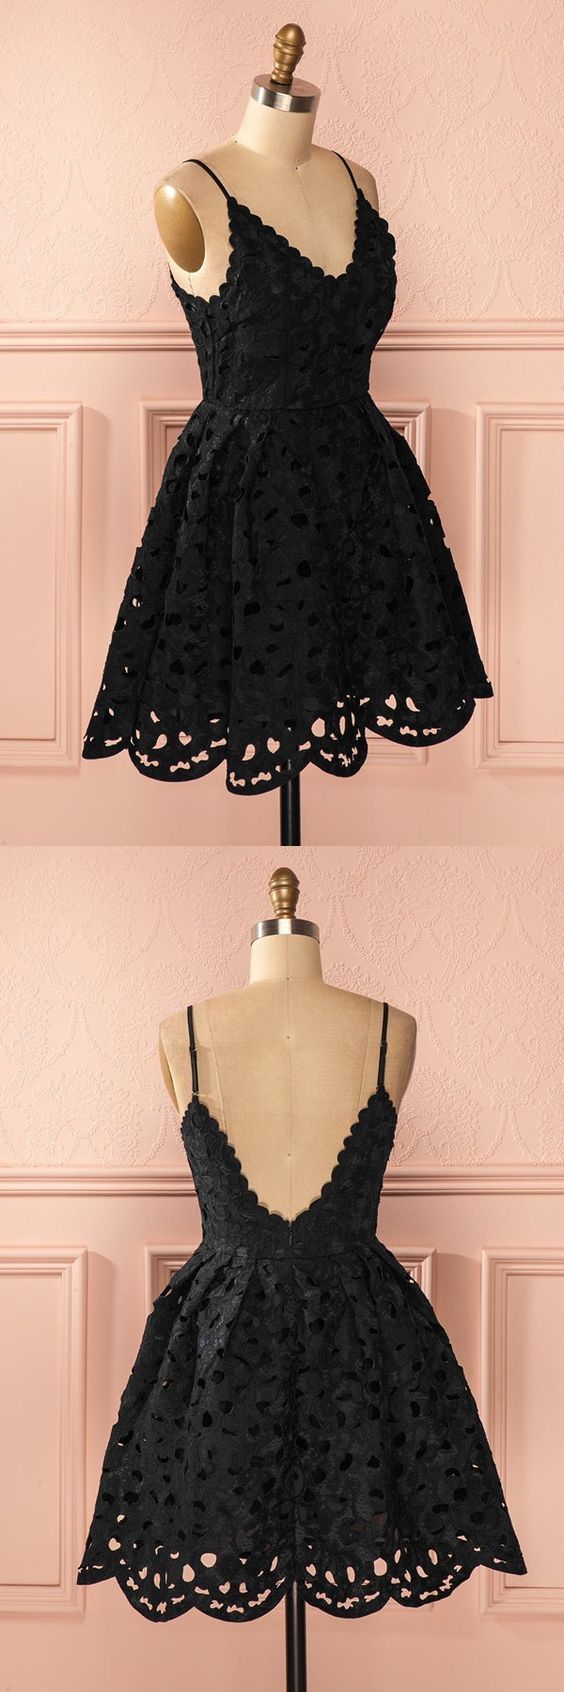 Prom Dresses Online, A Line Spaghetti Straps Backless Short Black Lace Homecoming Dress